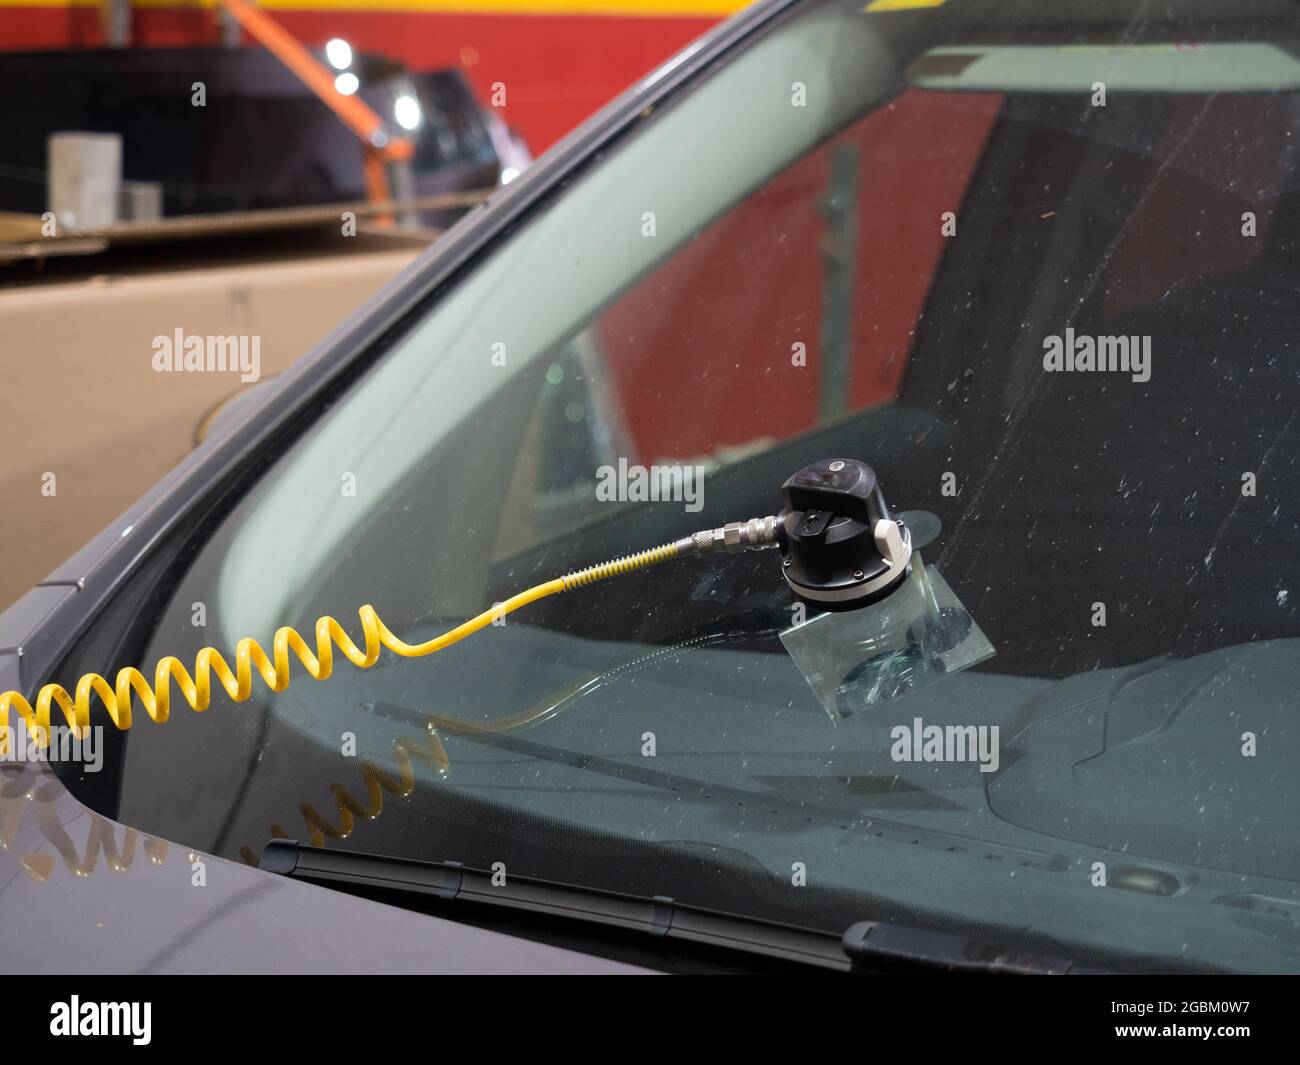 Broken car windscreen. Car accident. selective. The front safety glass car is broken. image for car, vehicle, transport, accident concept. Stock Photo